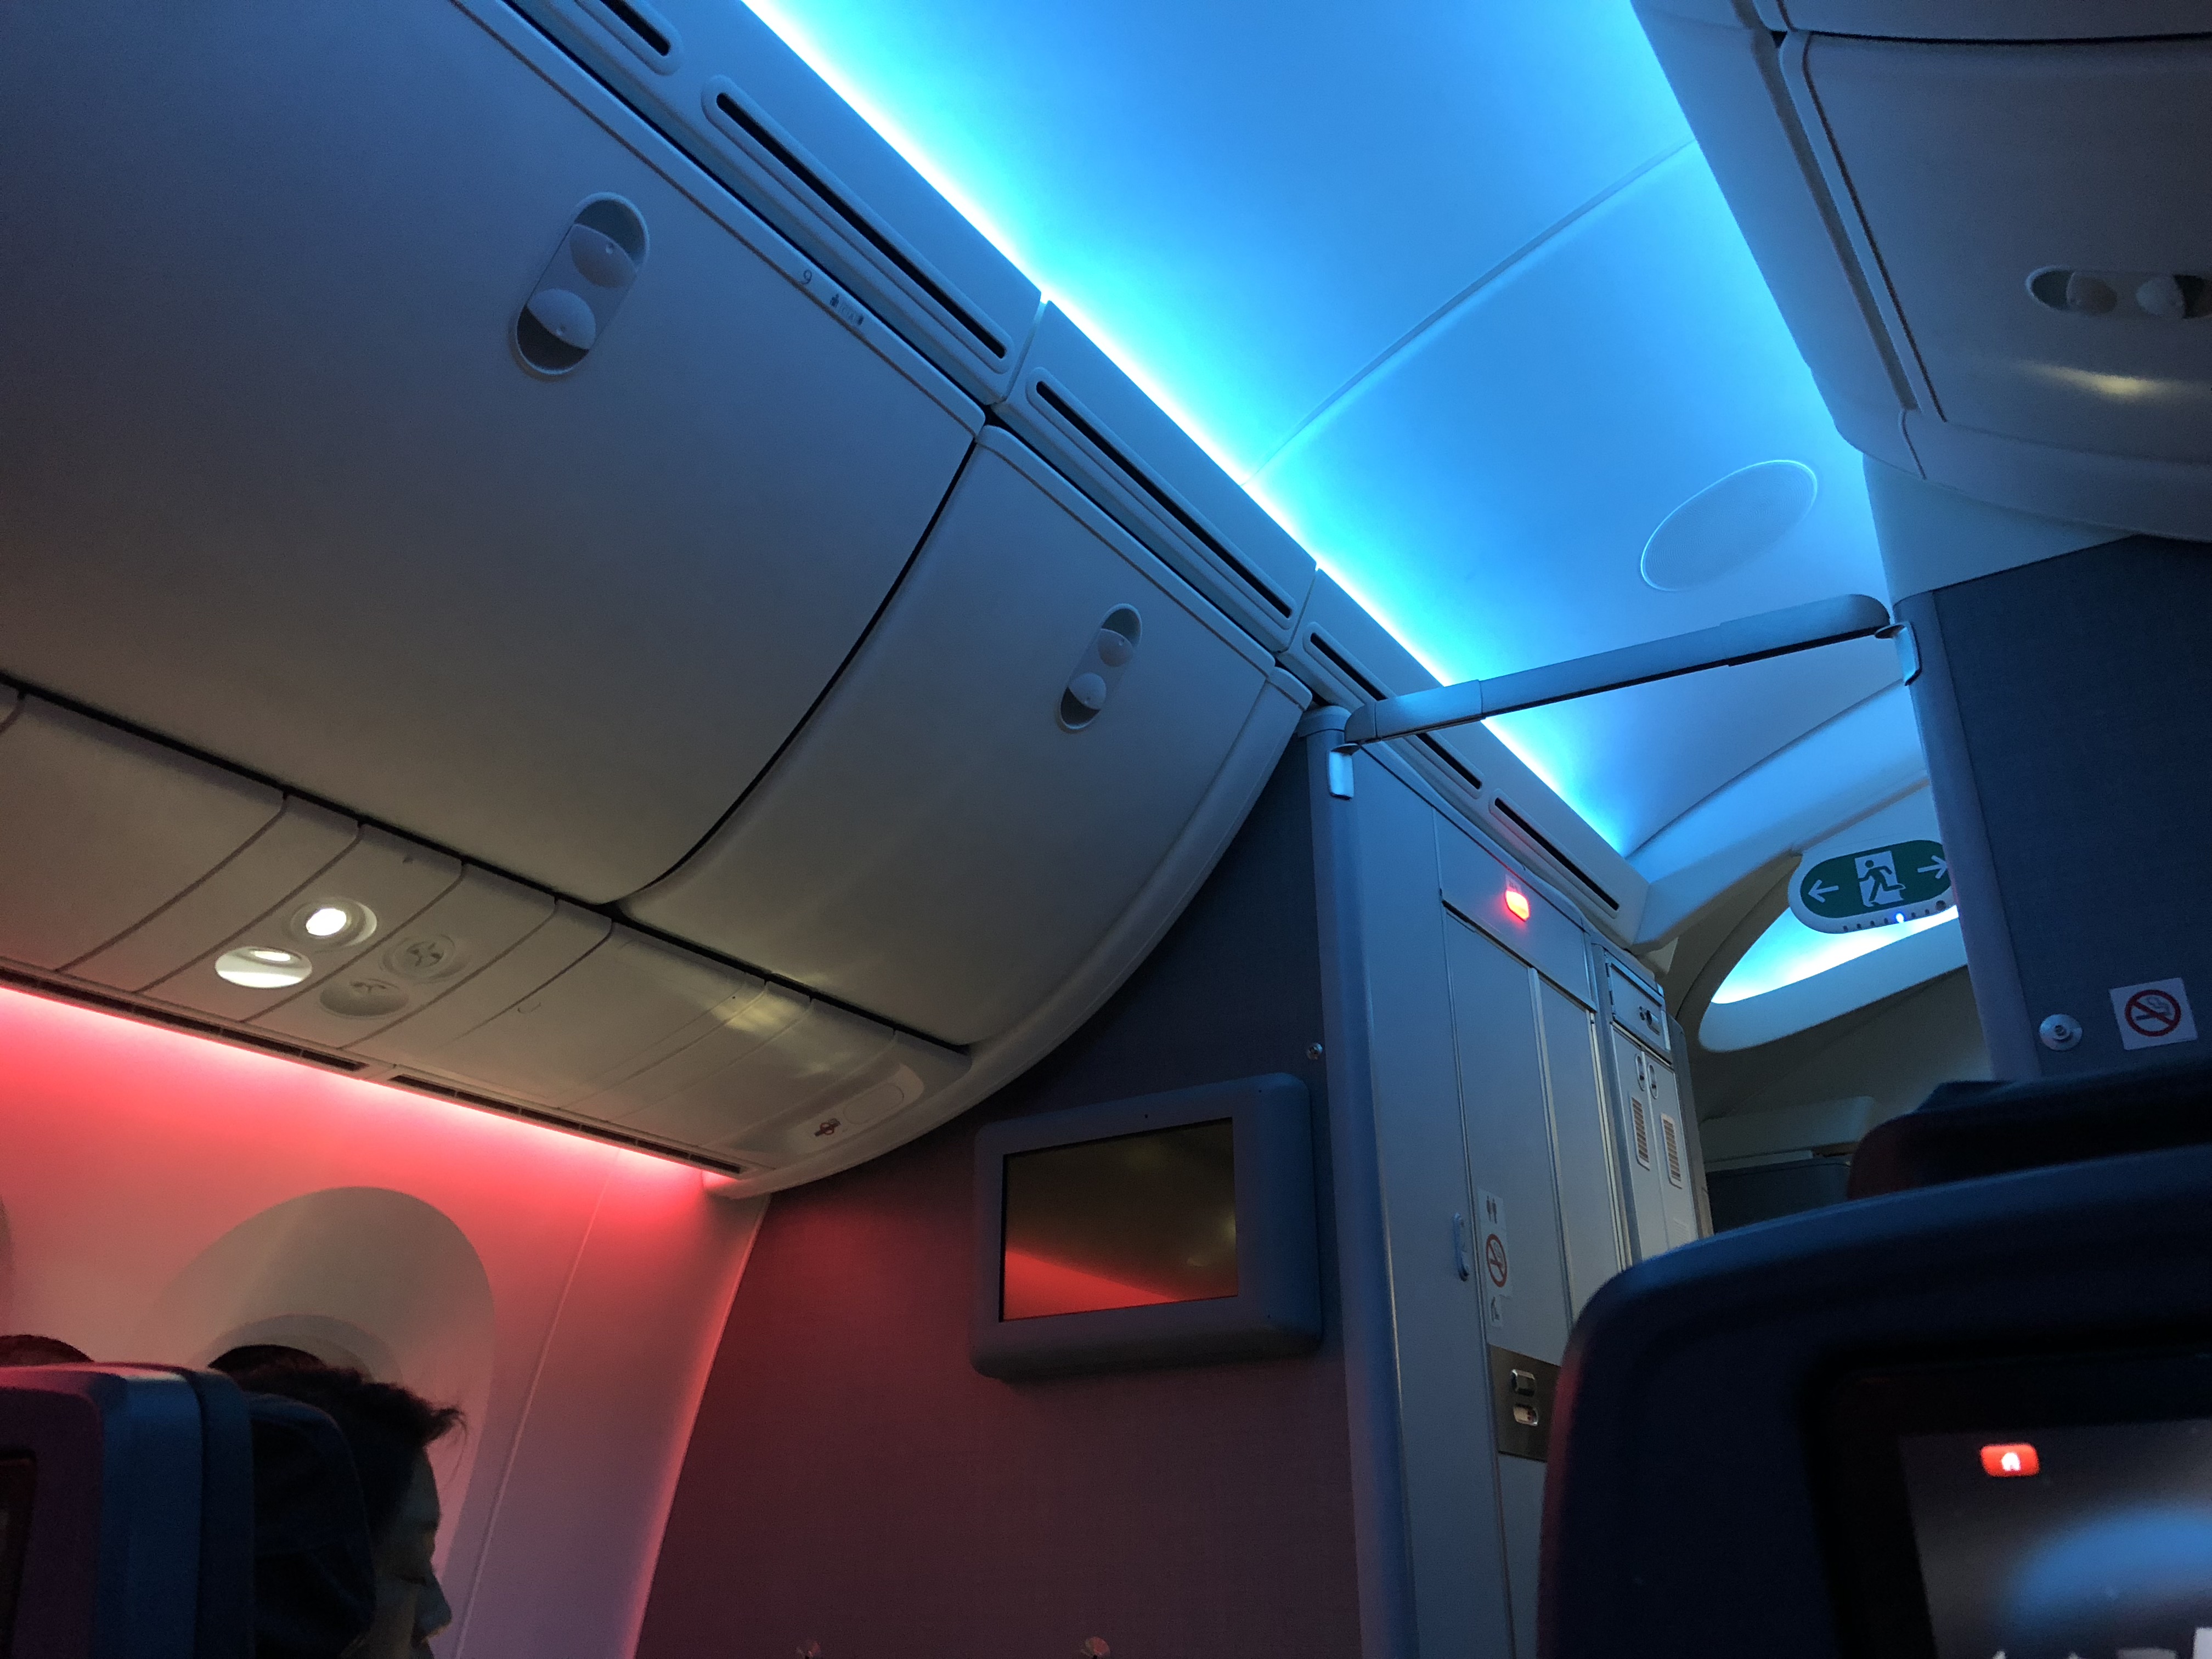 American Airlines Premium Economy Cabin on the Boeing 787-9